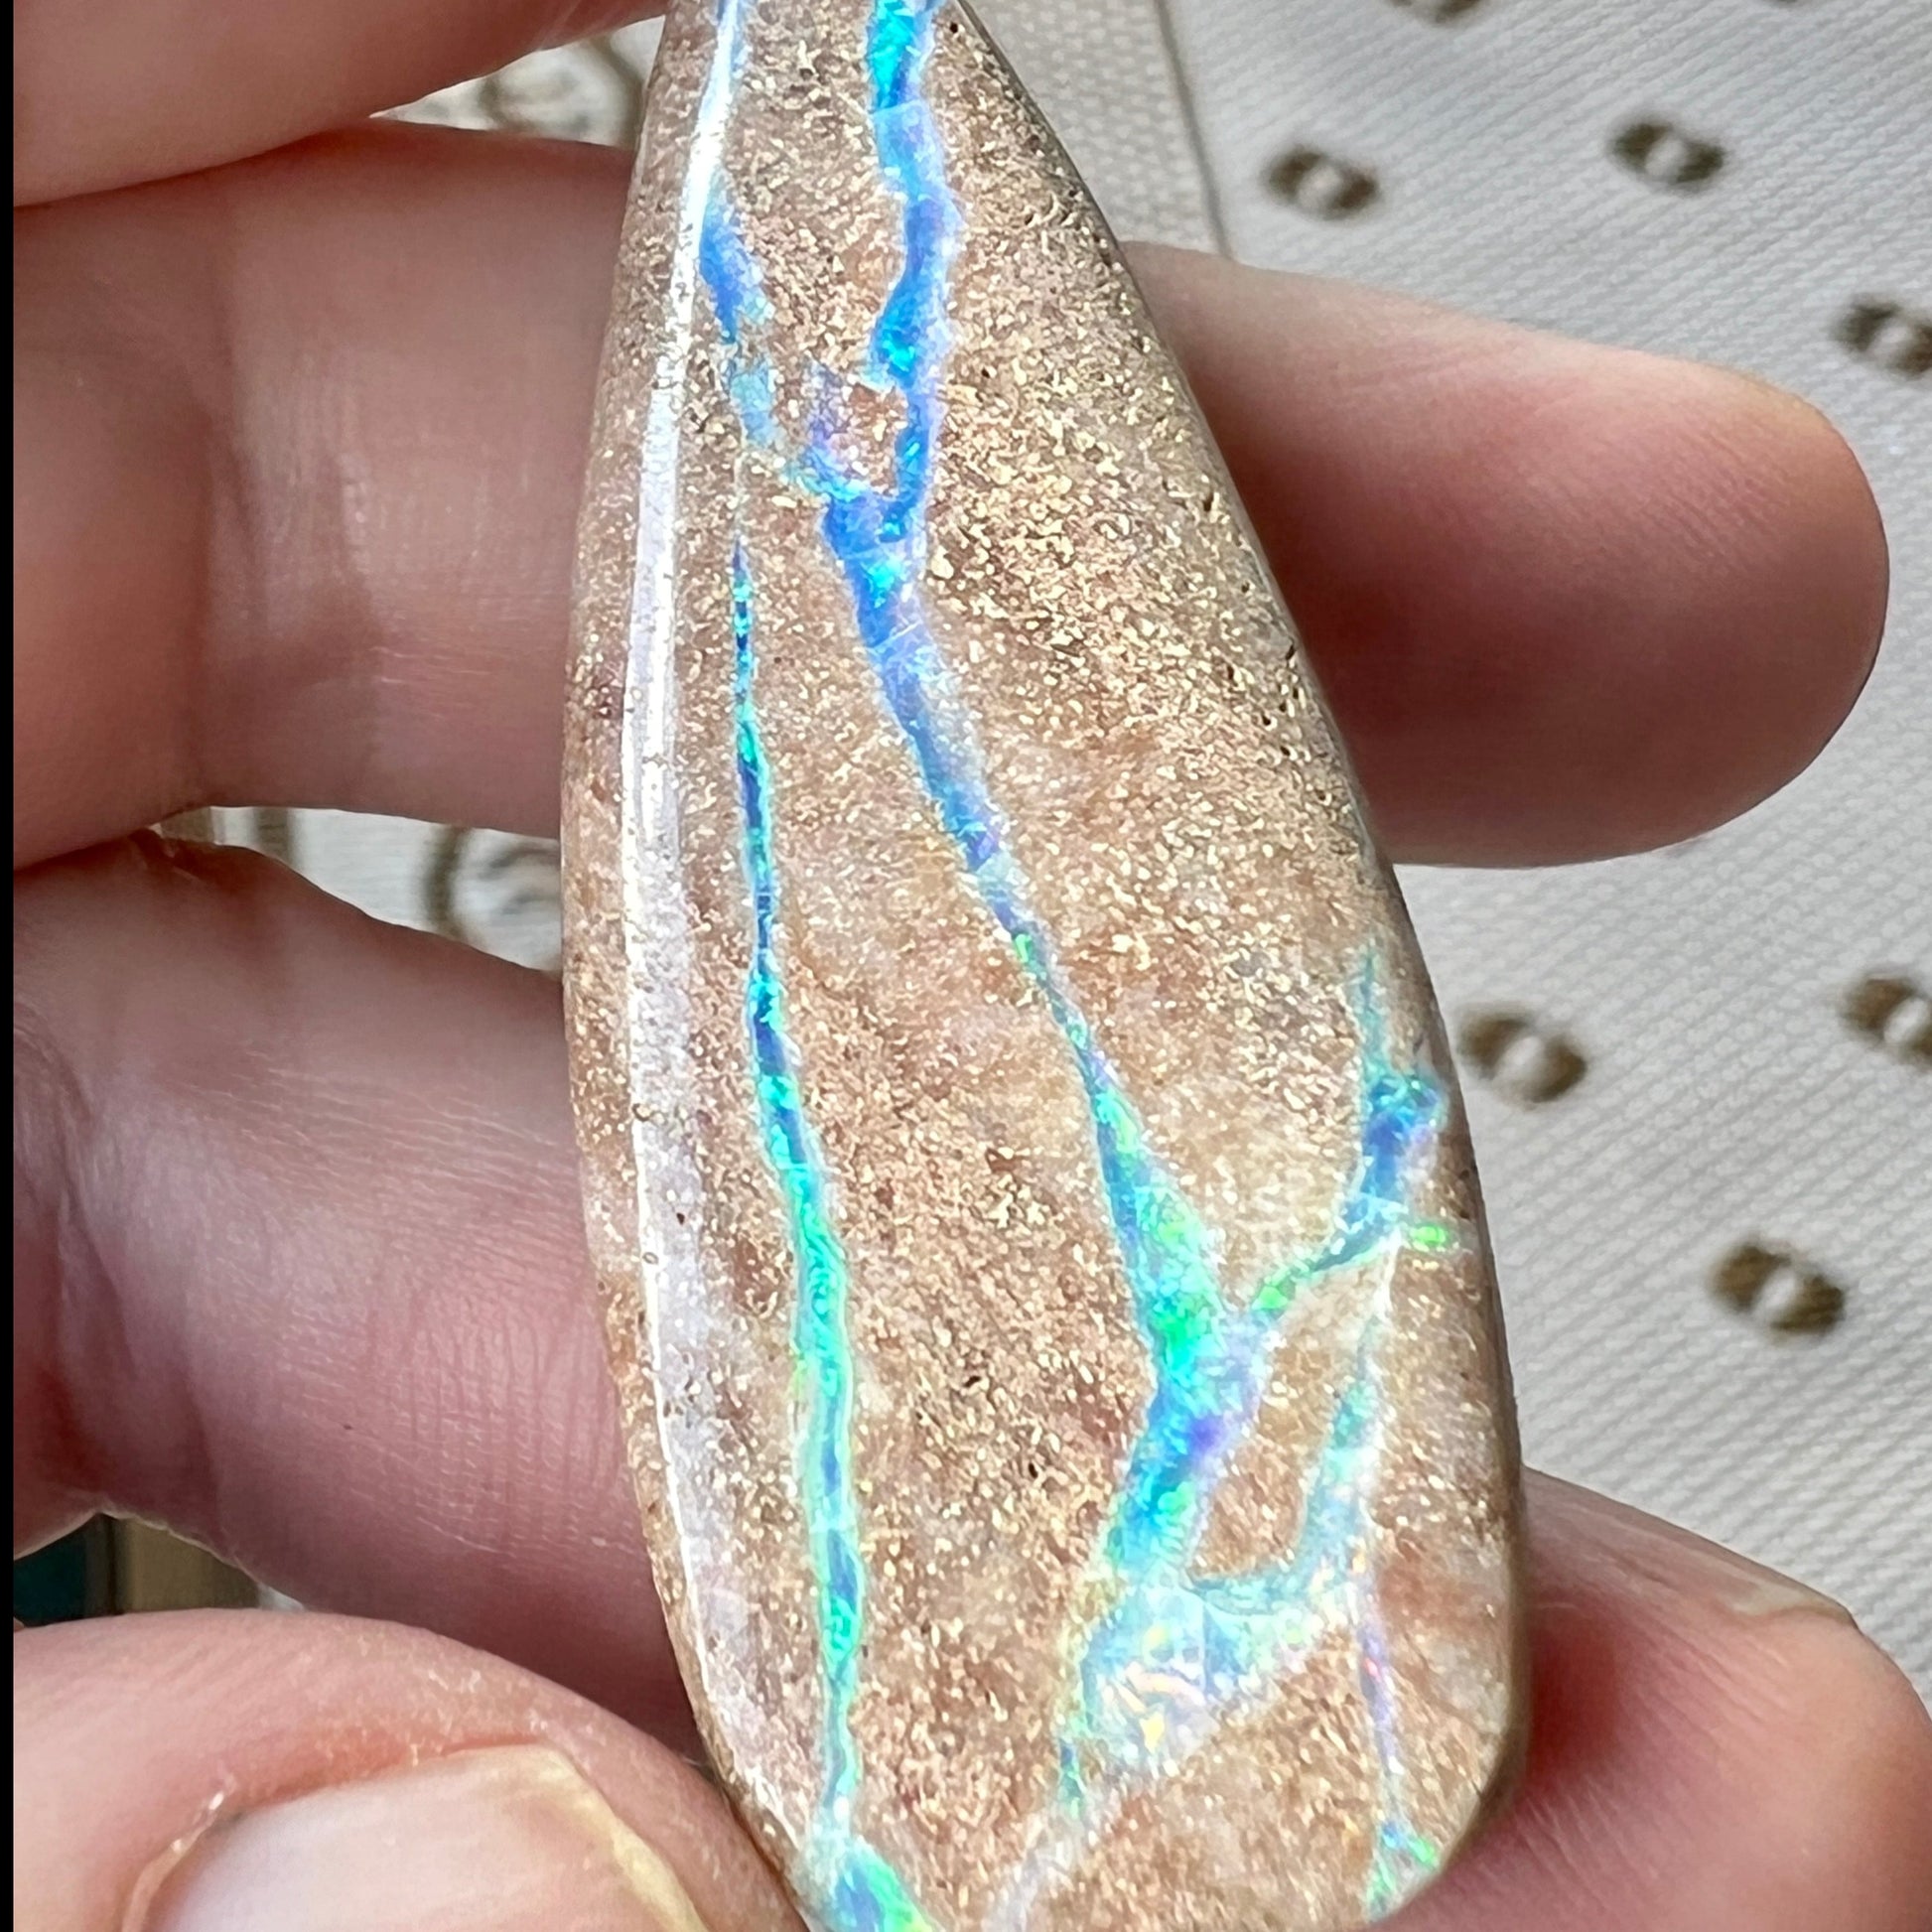 Lovely stone with aqua coloured lines throughout. Would make a statement piece pendant.